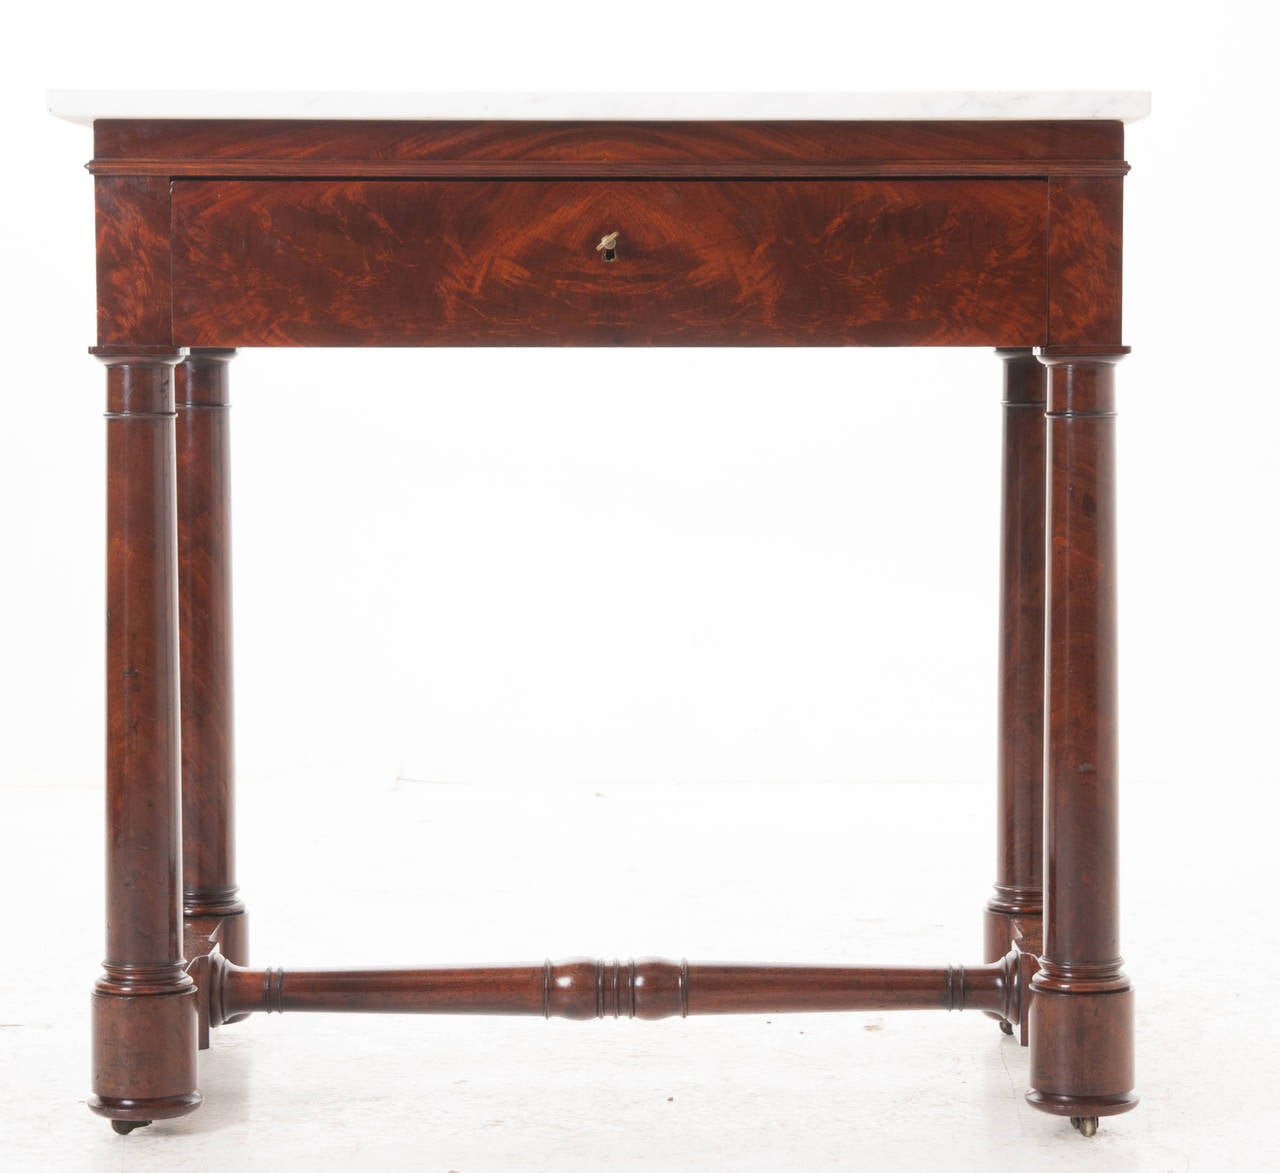 A stunning English flame mahogany side table with a white marble top. There is a single fitted drawer in the apron over four cylinder legs connected with a stretcher, the whole on its original casters, 1880s.